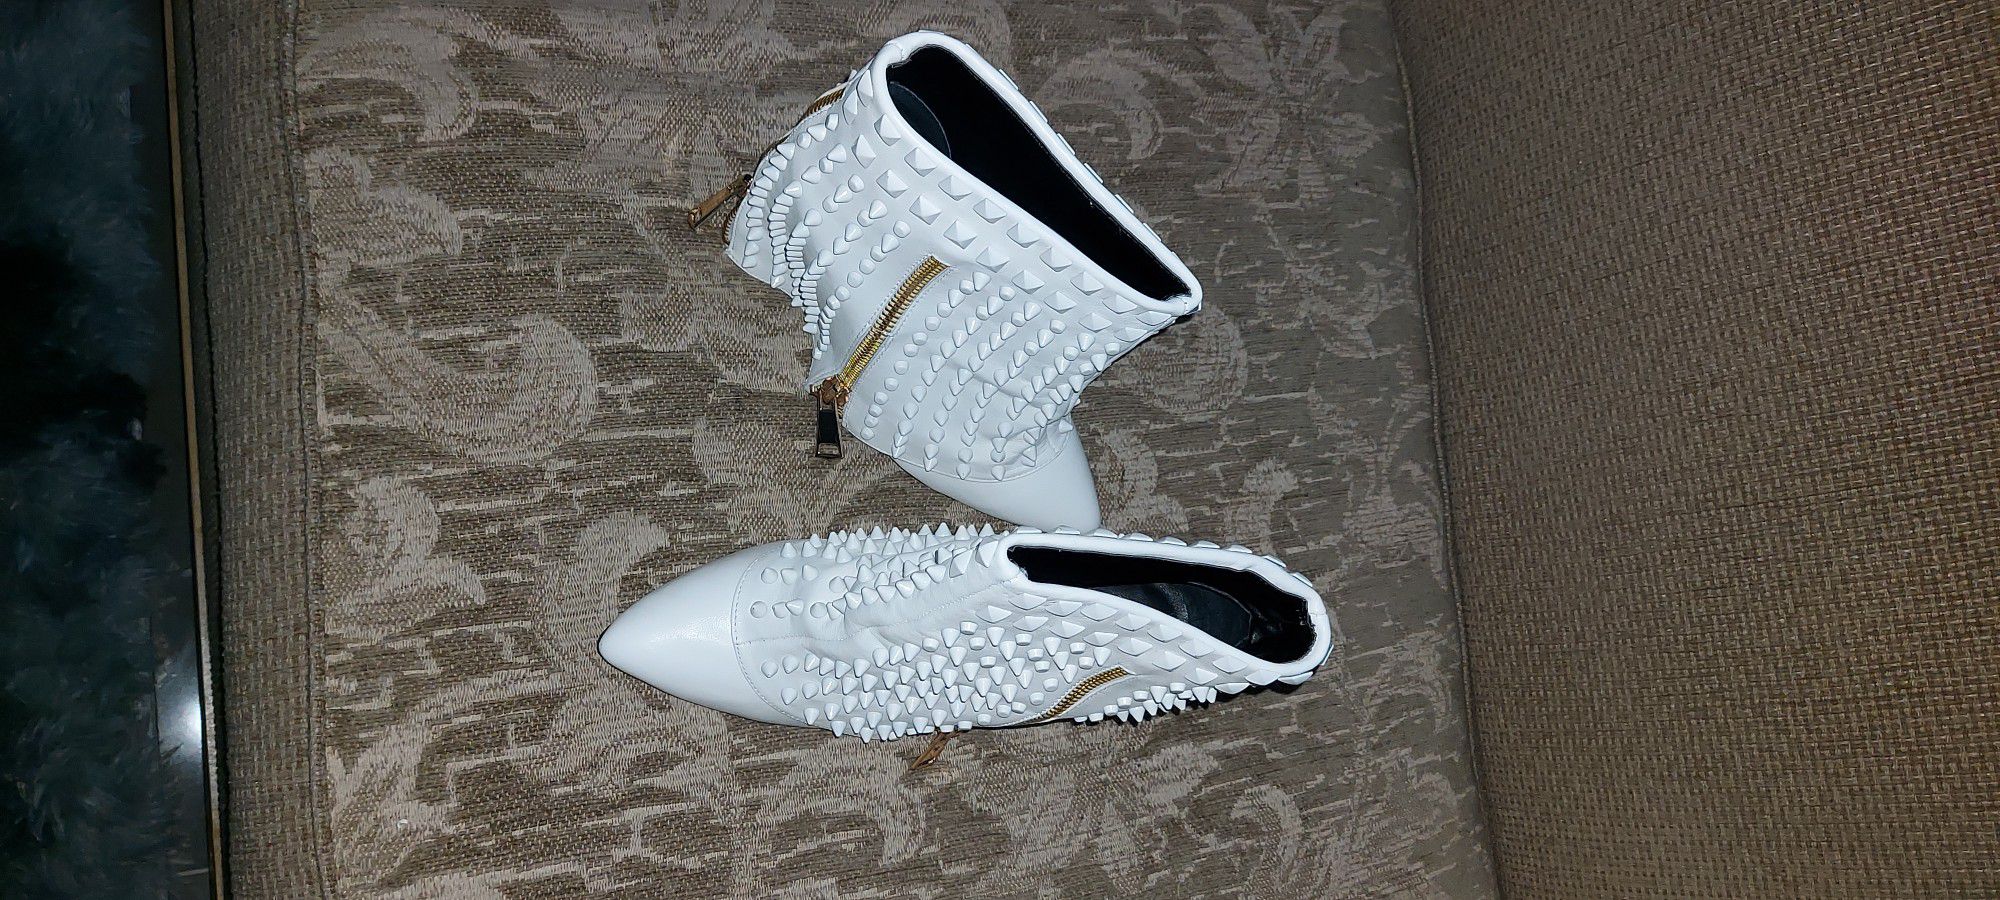 Lust For Life Battle Studded Boots Shoes Women's Size 9